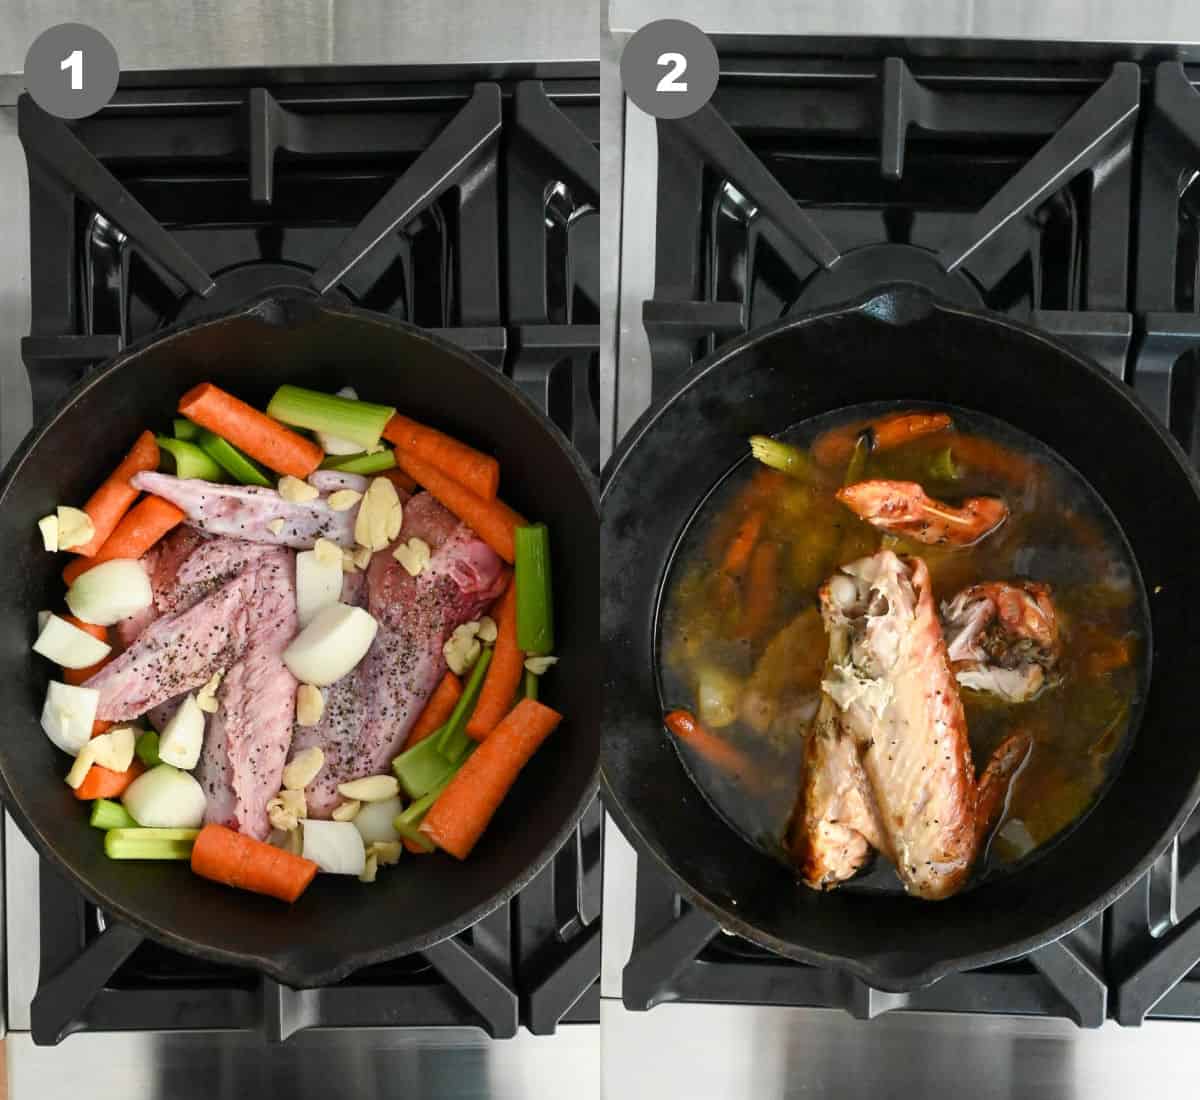 Turkey wings and vegetables placed in a dutch oven then water poured in to simmer.